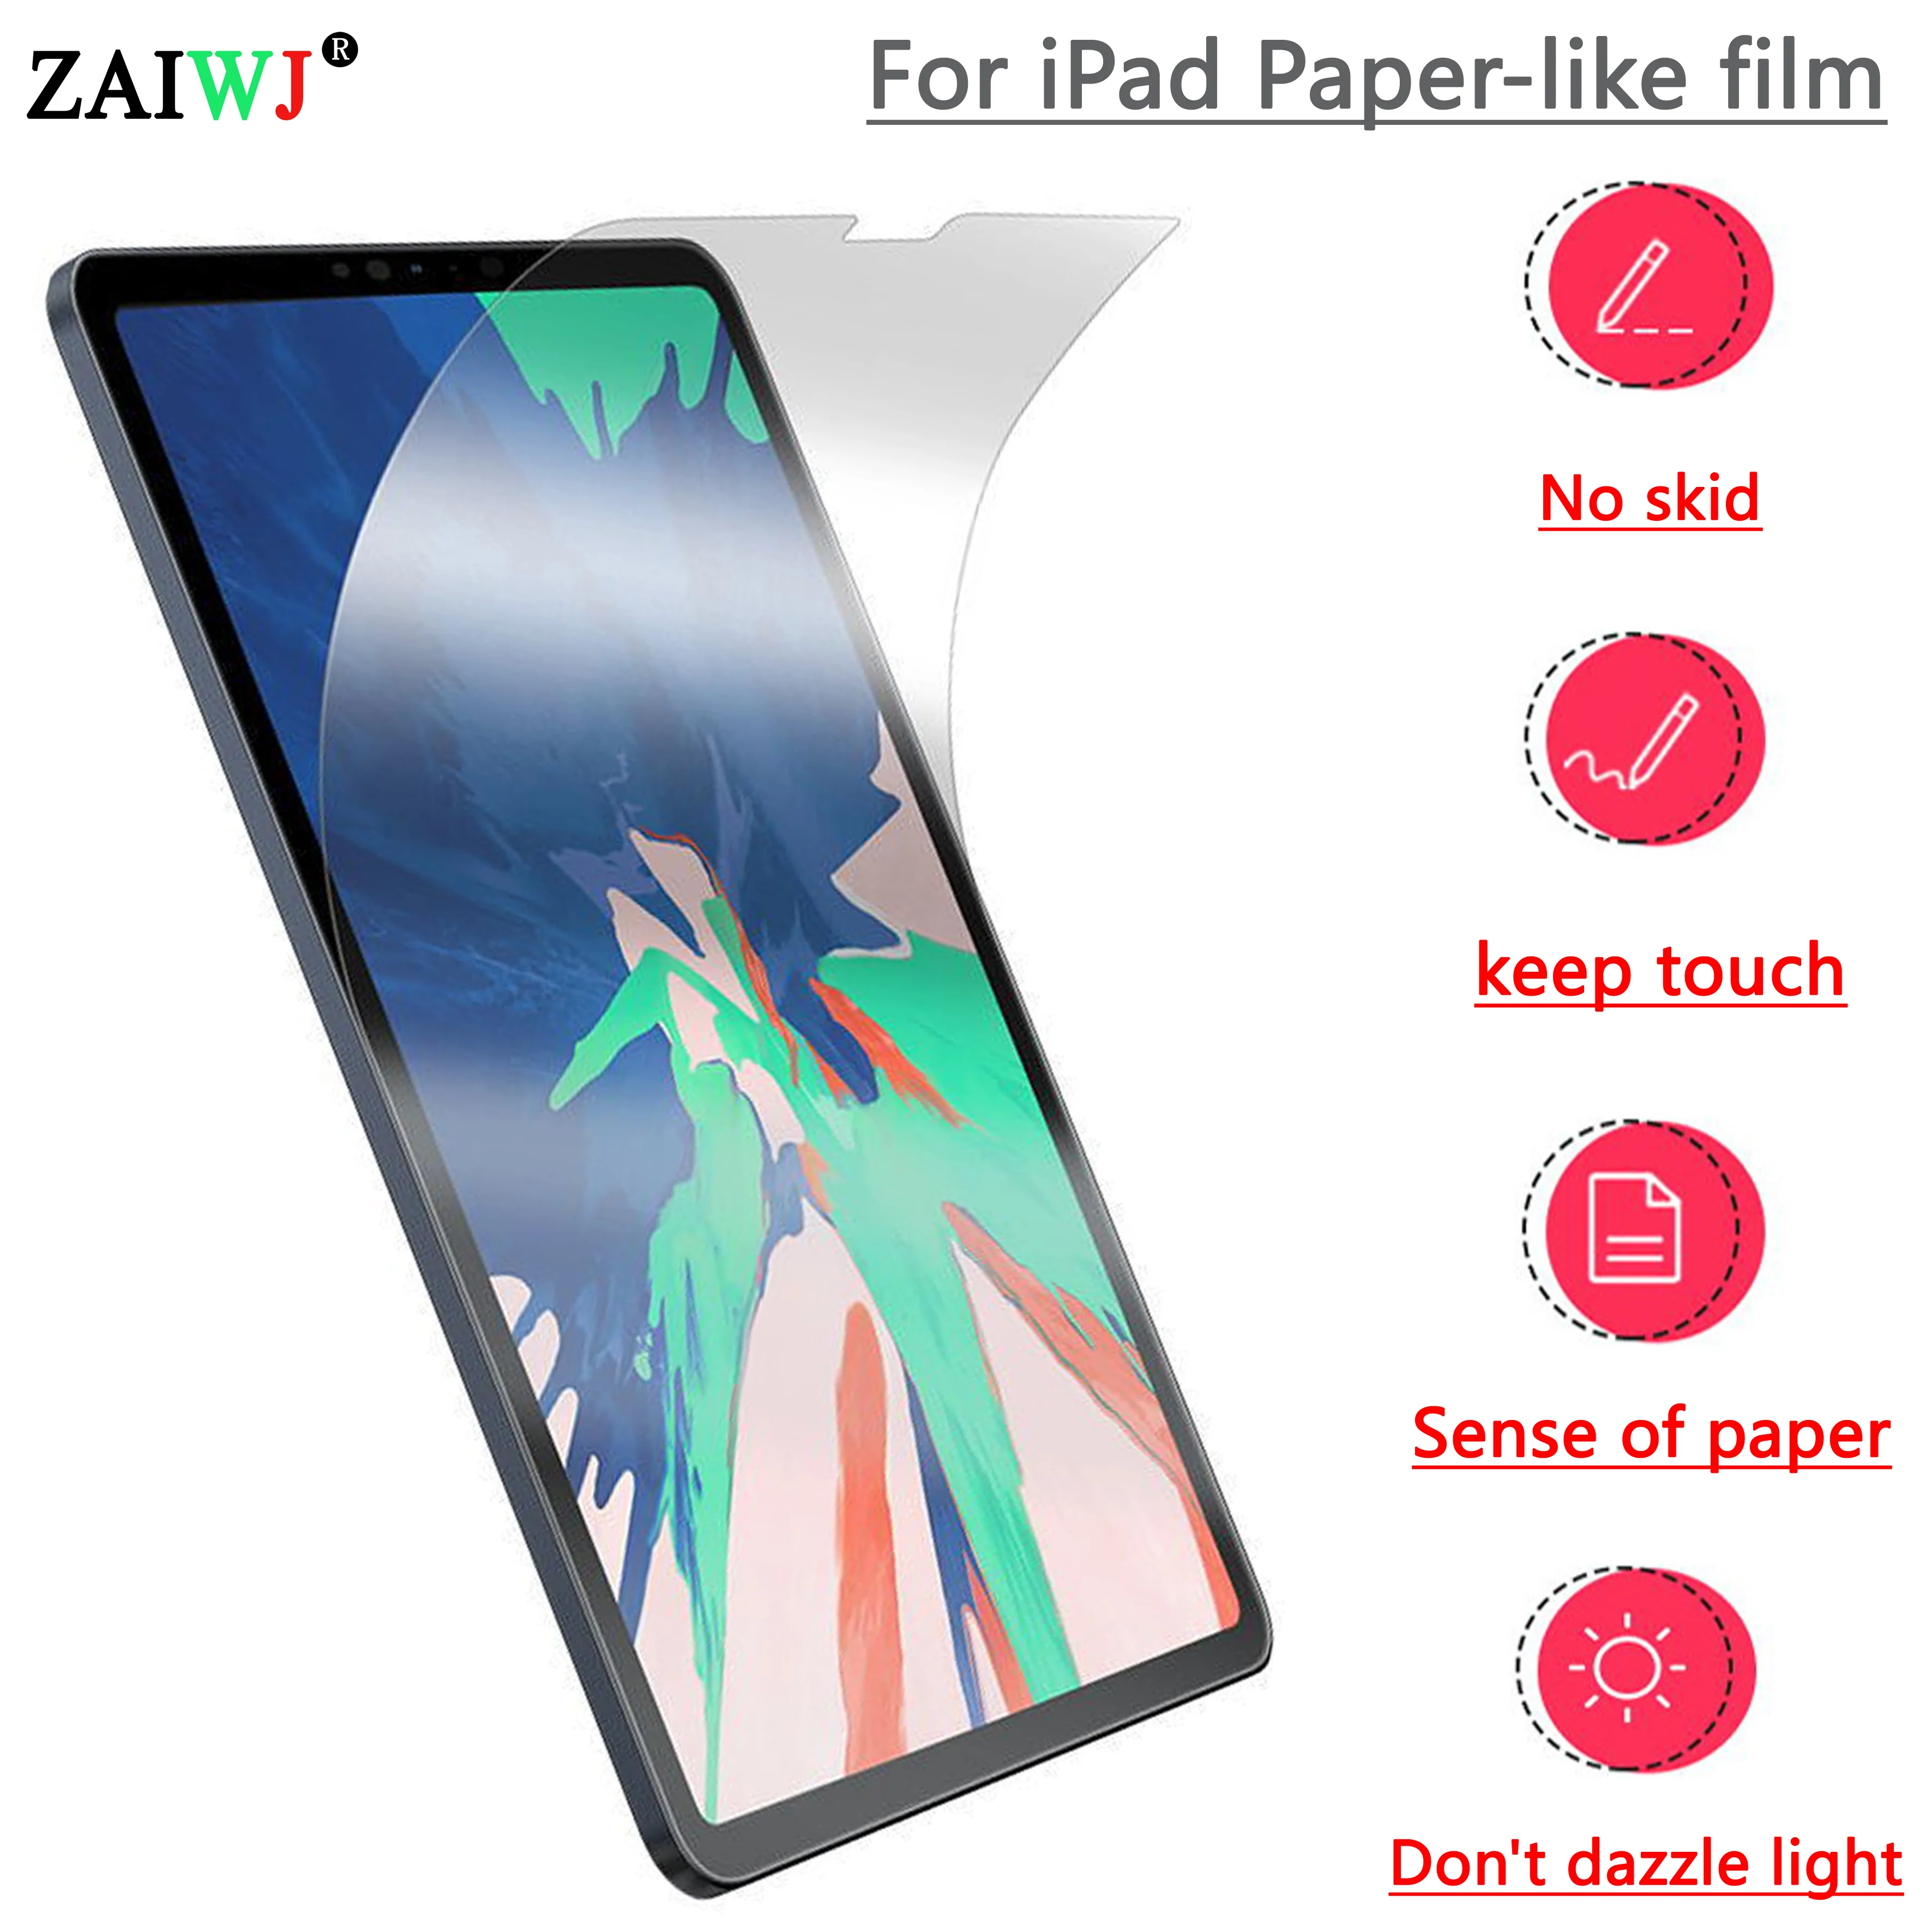 

Paper Screen Protector Like Film Matte PET Anti Glare Painting For iPad mini Air 4 3 2 10.9 2020 10.2 Pro 10.5 11 12.9 9.7 inch